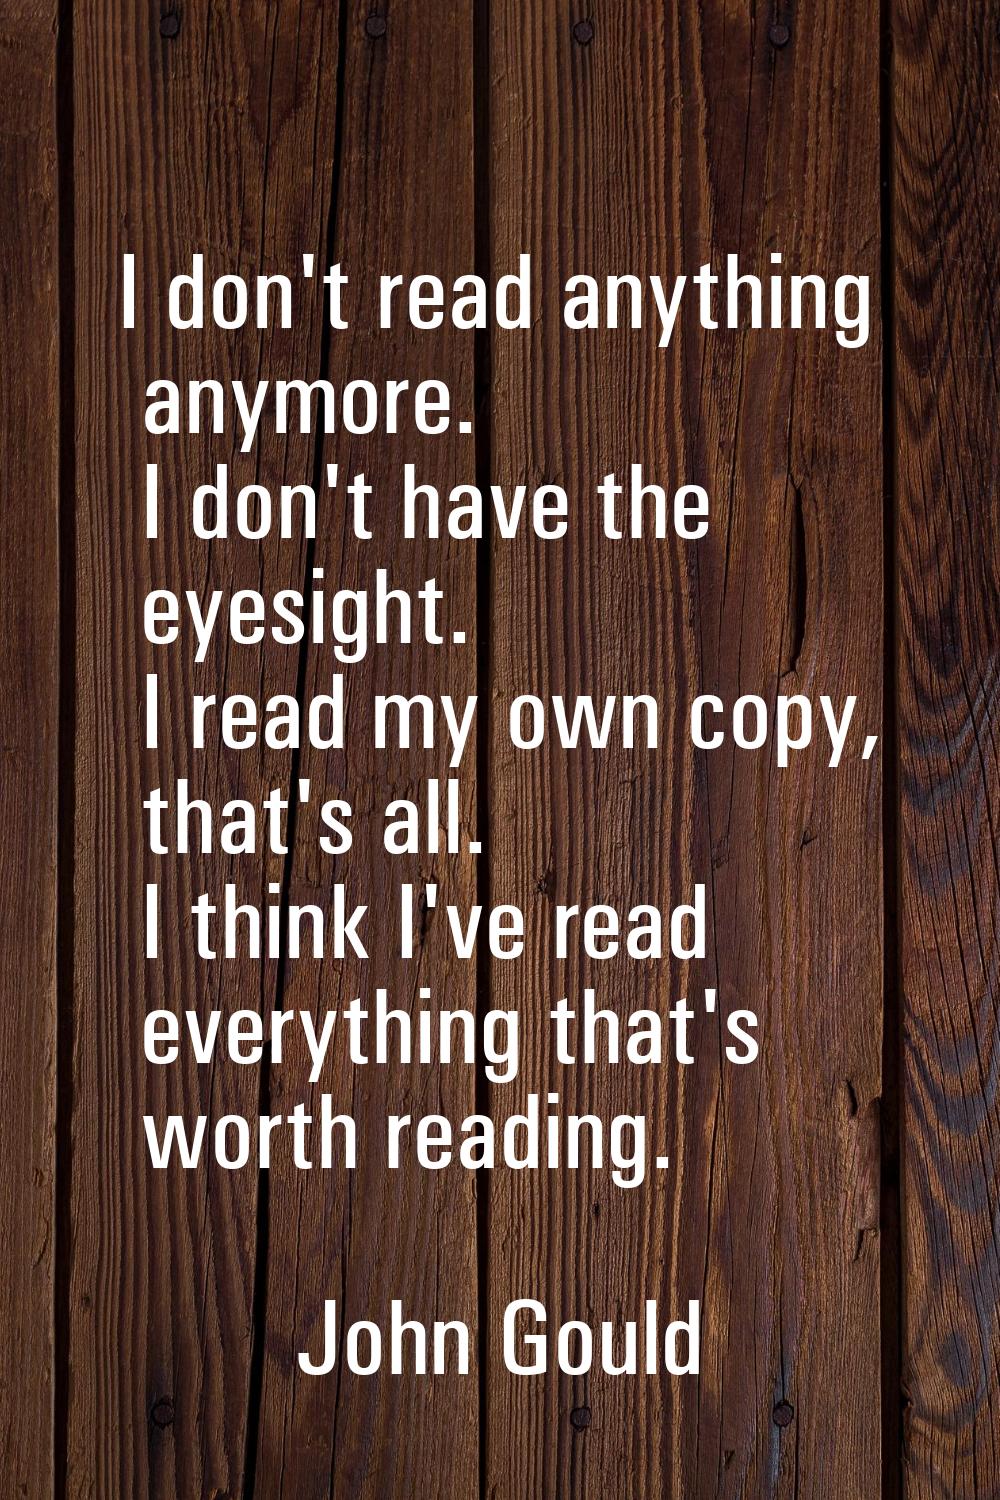 I don't read anything anymore. I don't have the eyesight. I read my own copy, that's all. I think I